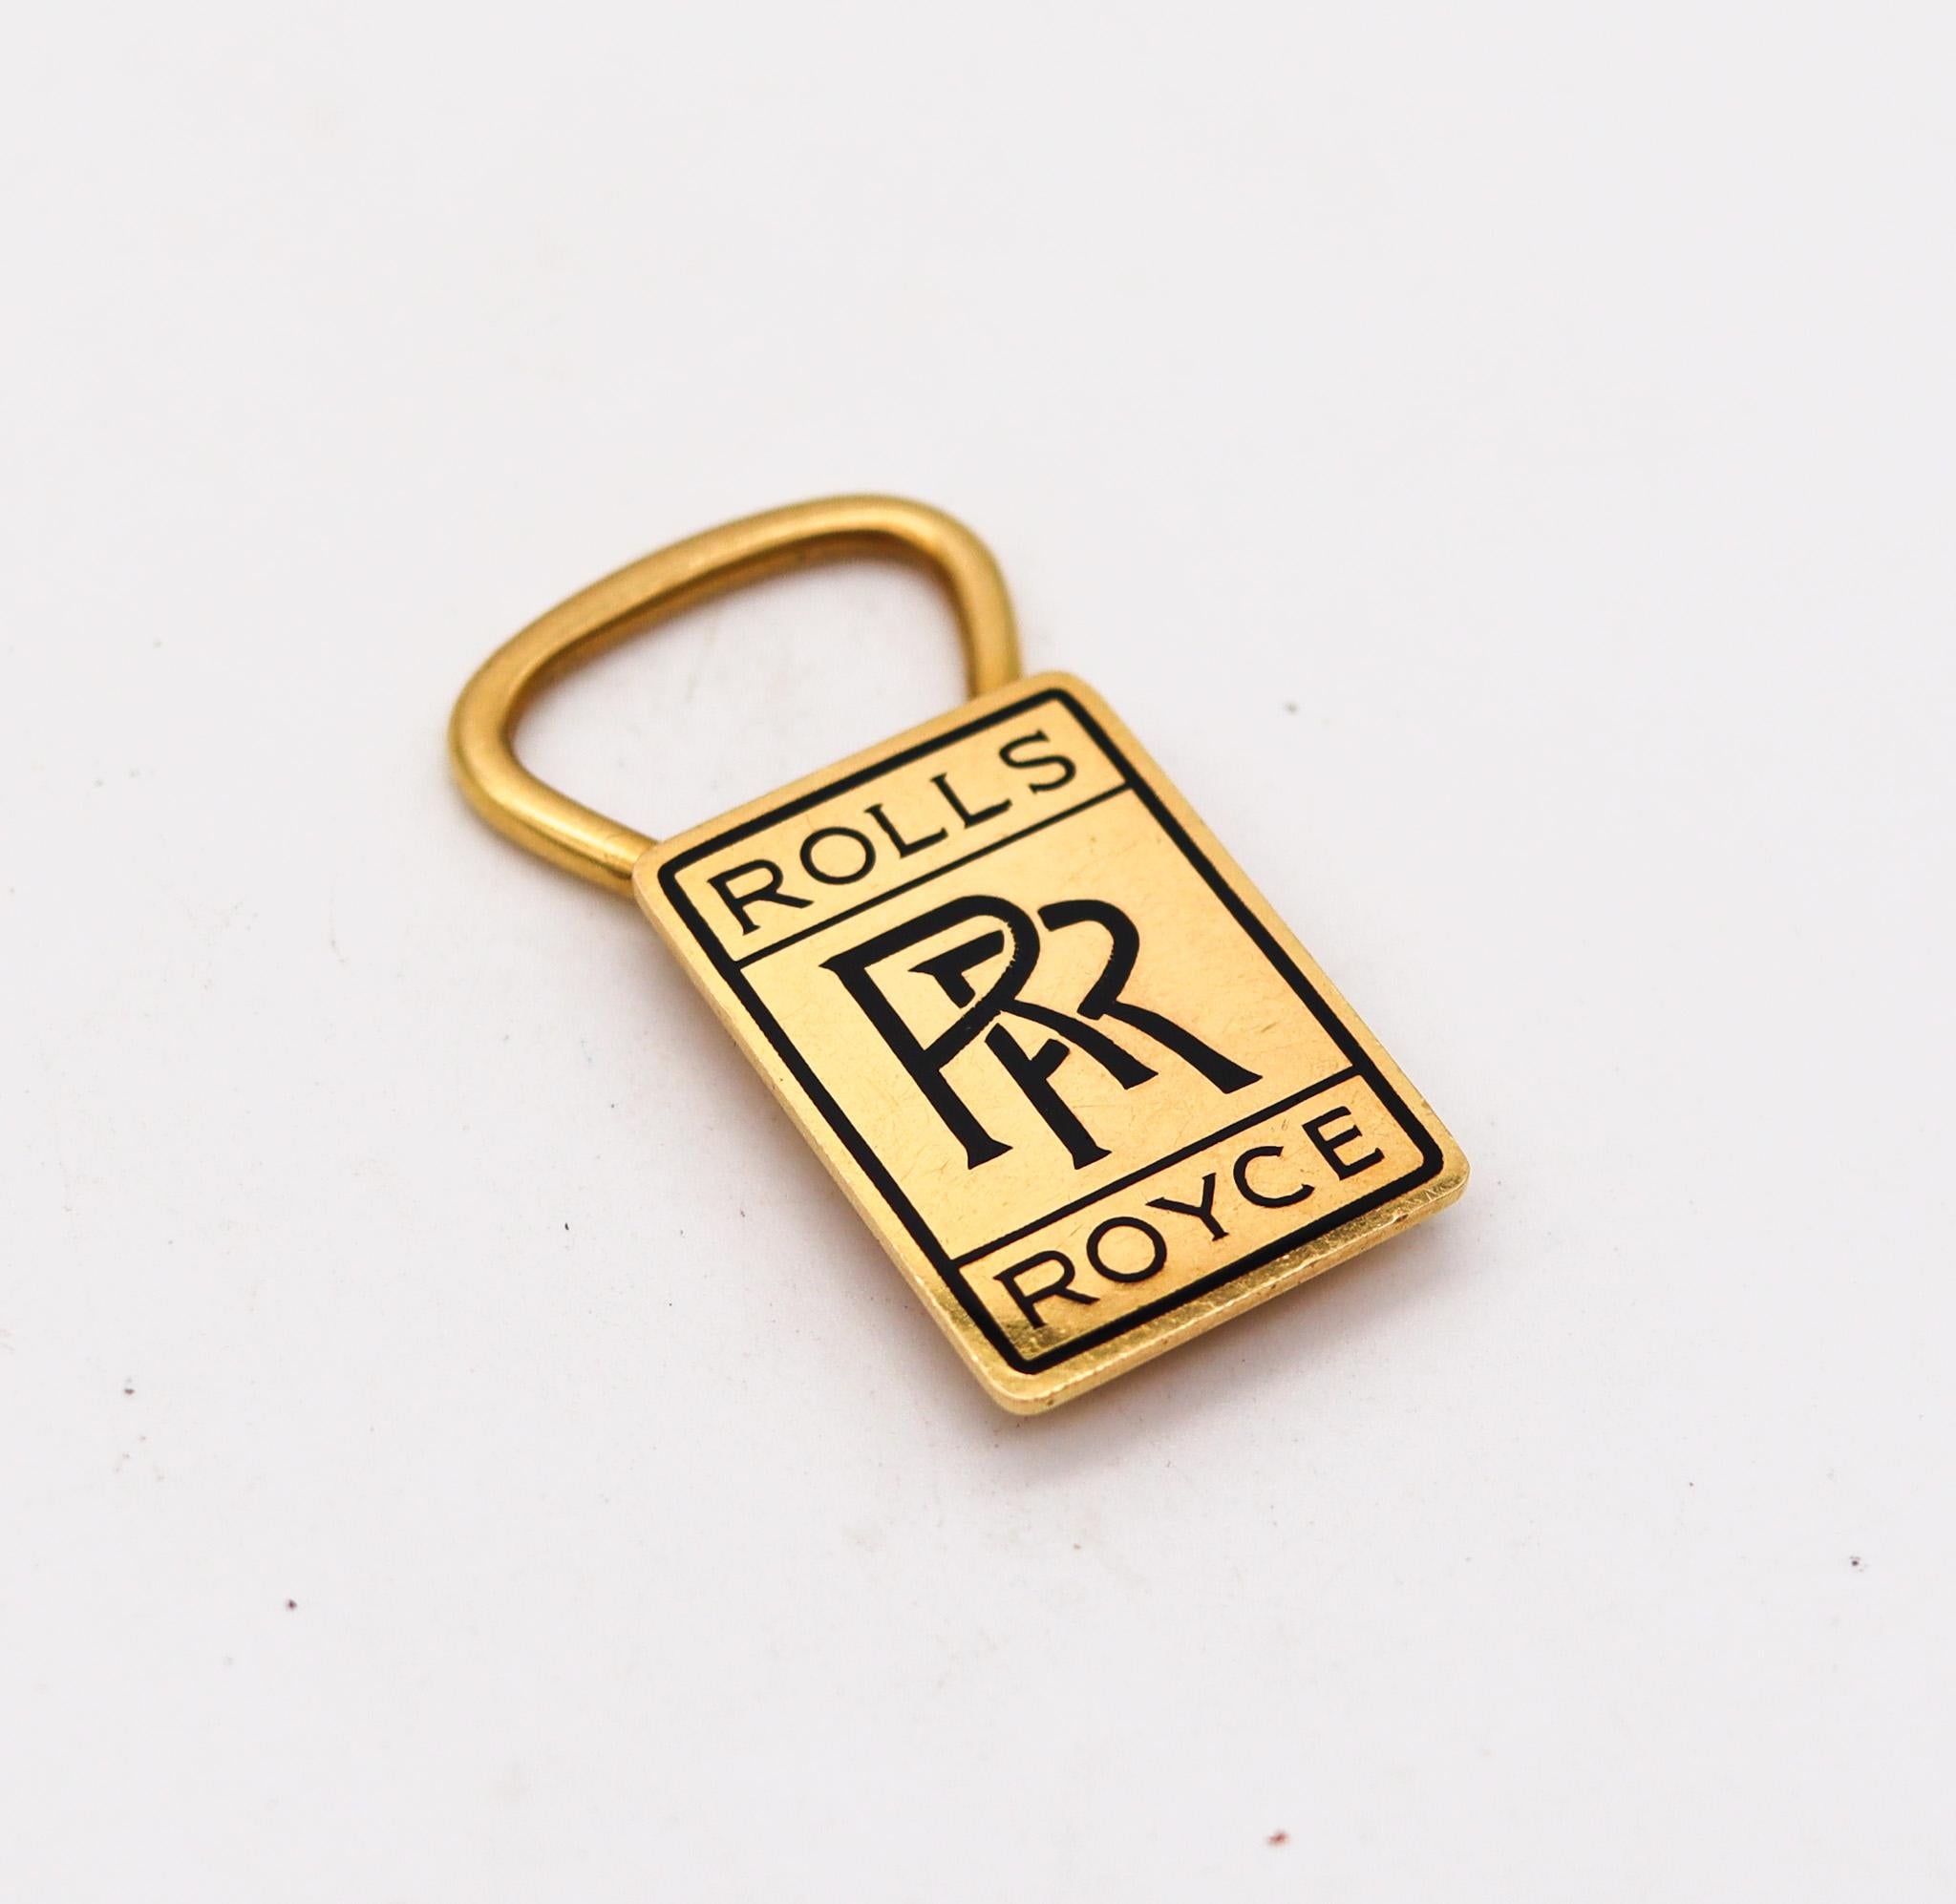 Rolls Royce key chain designed by Bvlgari.

Beautiful and unusual key chain, created in Milano Italy for the Rolls Royce car company by the jewelry house of Bvlgari. This piece is a vintage one from the 1970's, crafted in solid yellow gold of 18